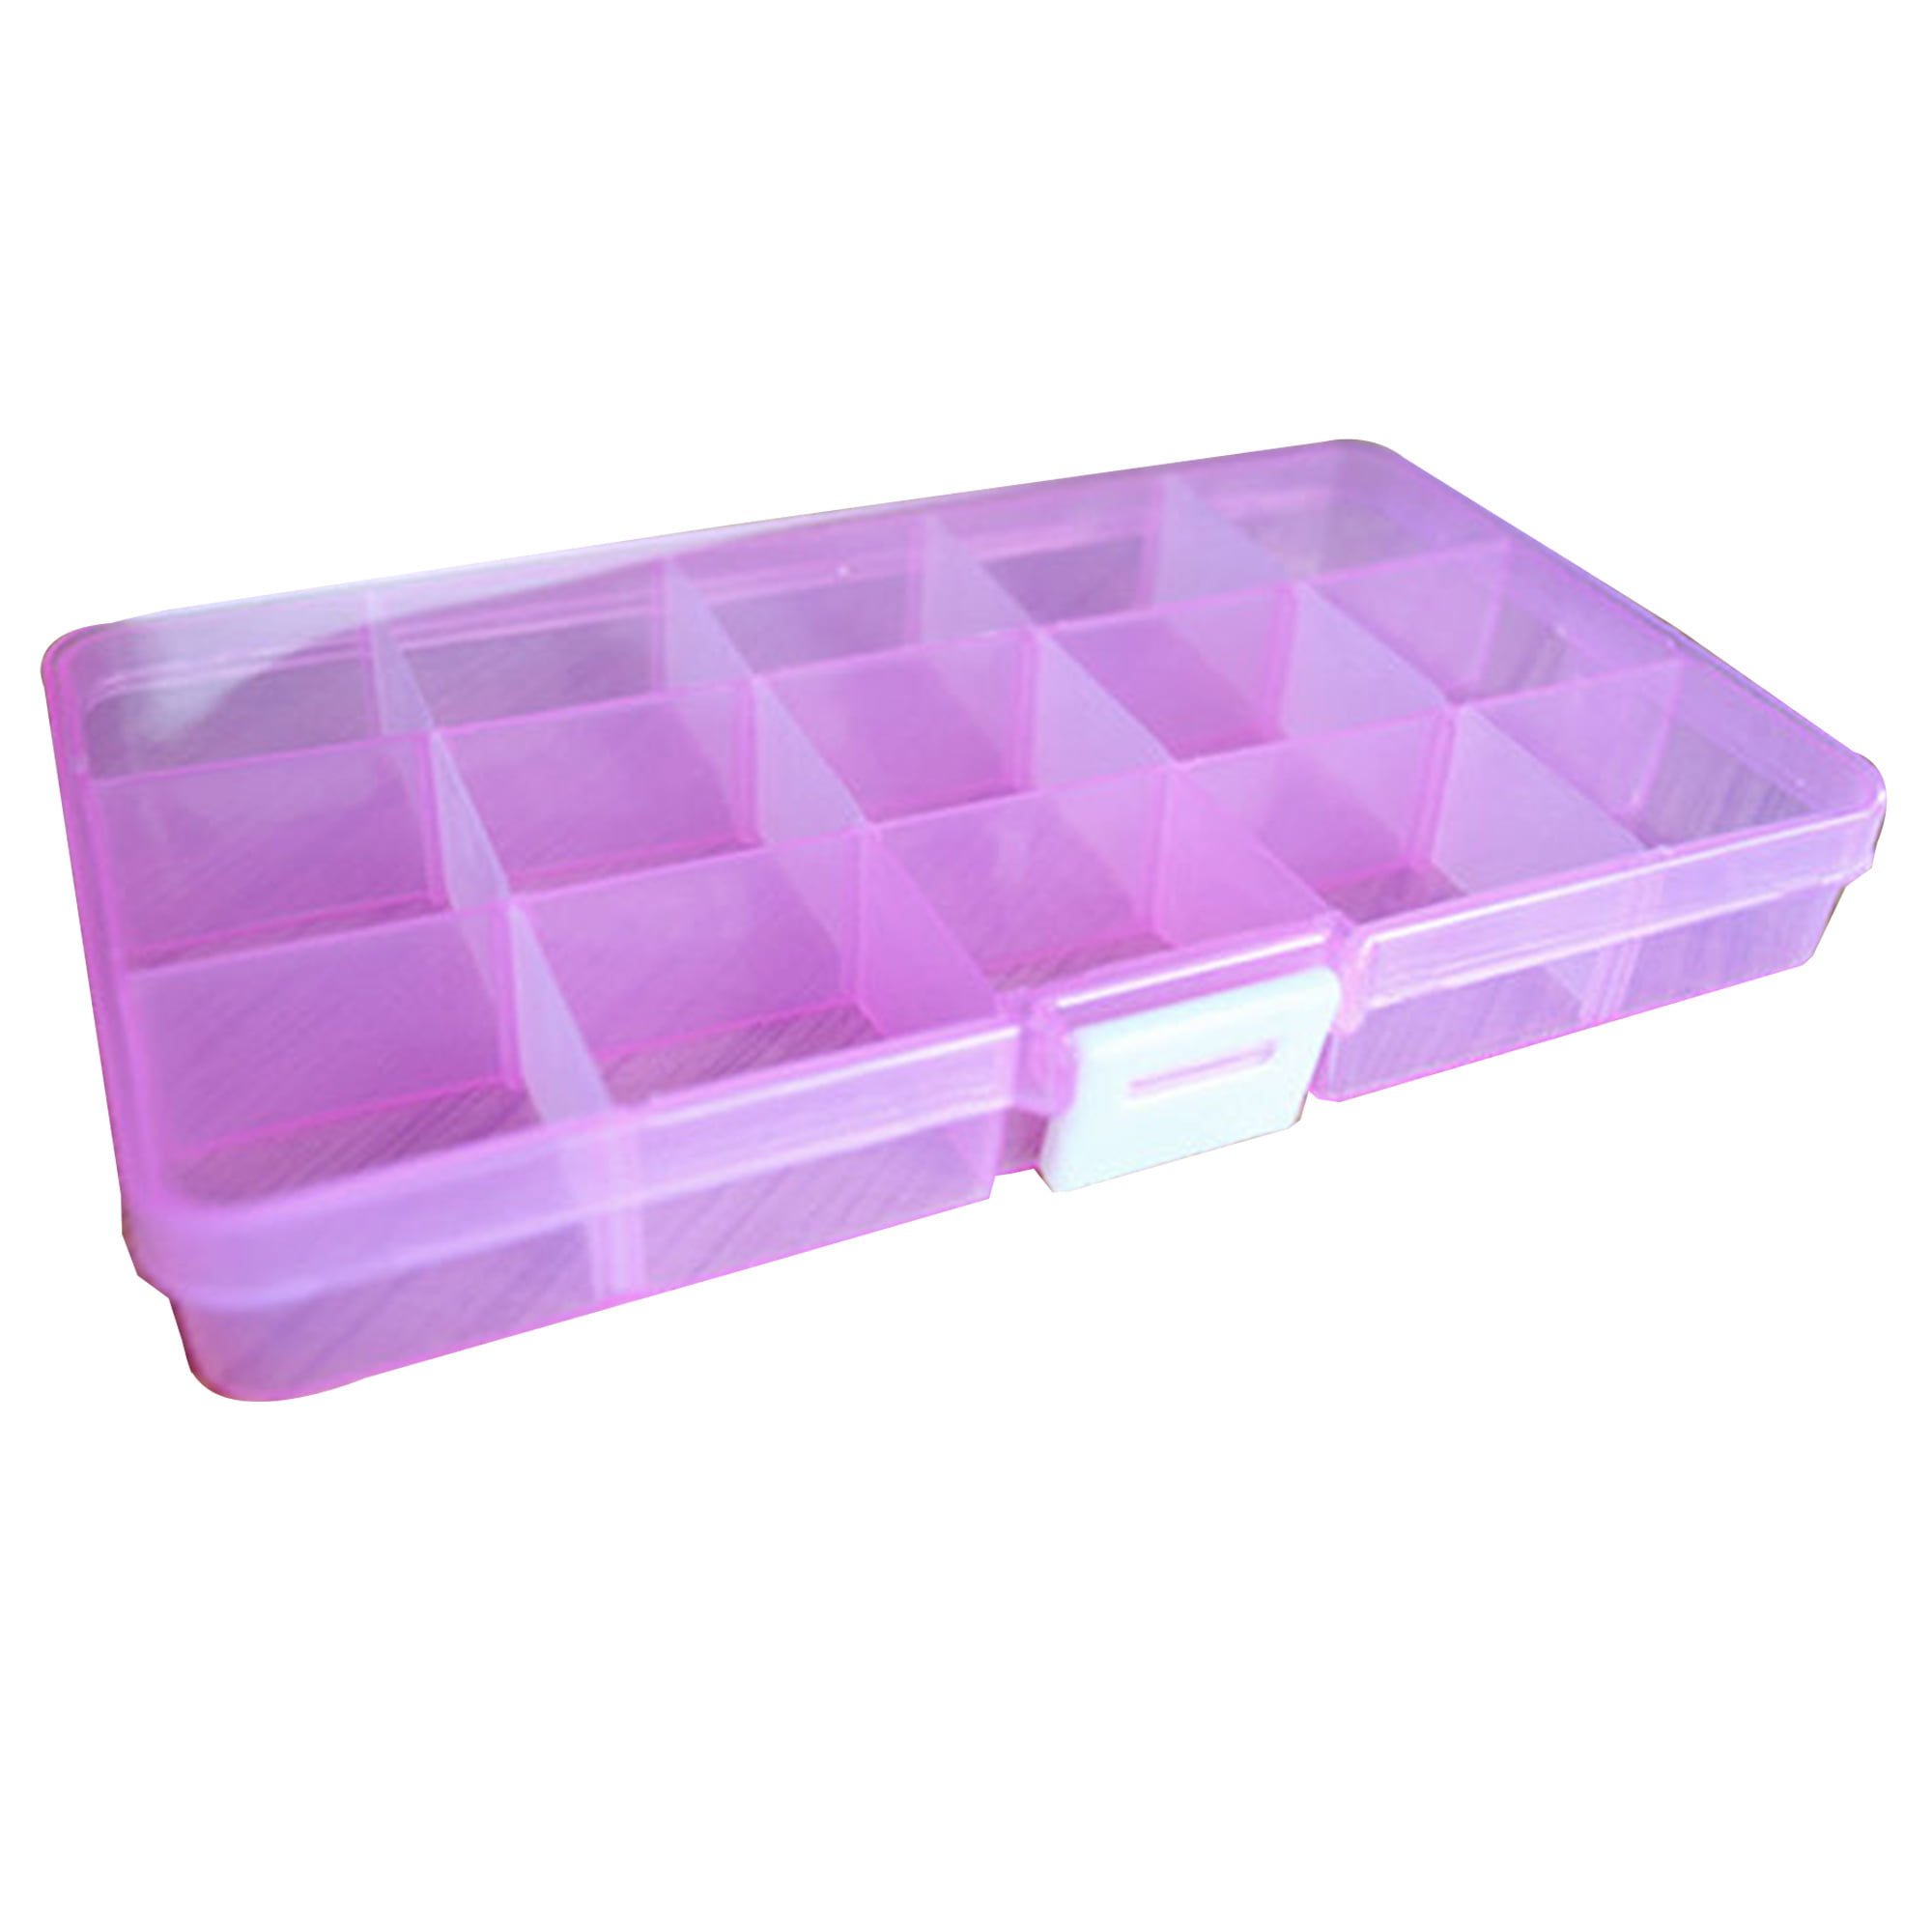 8 Slots Clear Storage Box Craft Bead Jewelry Organizer Detachable Container Case 